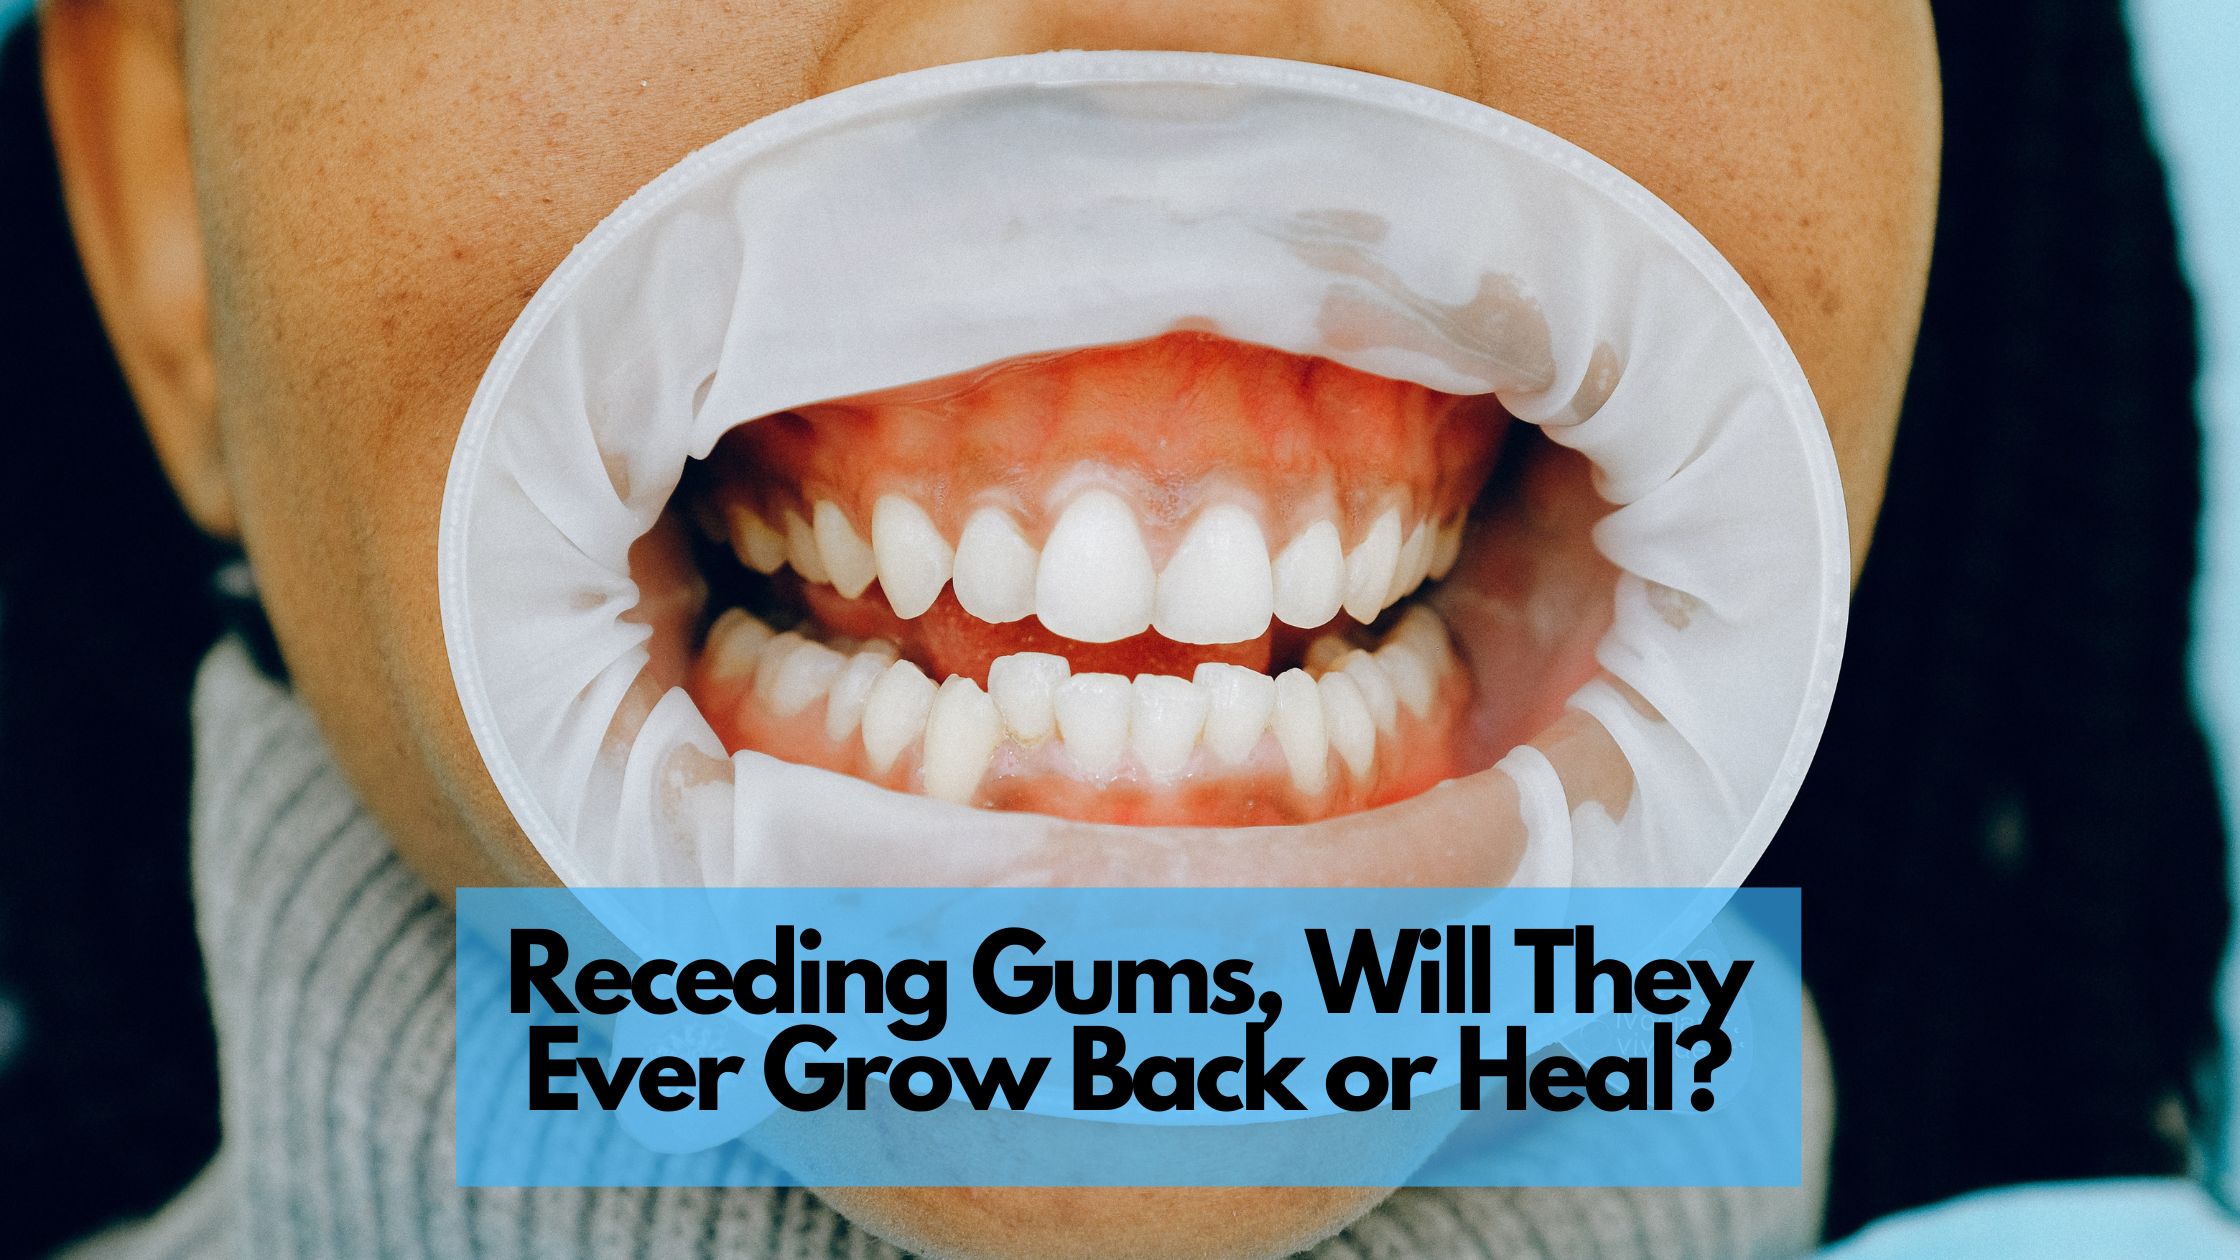 Receding Gums, Will They Ever Grow Back or Heal?